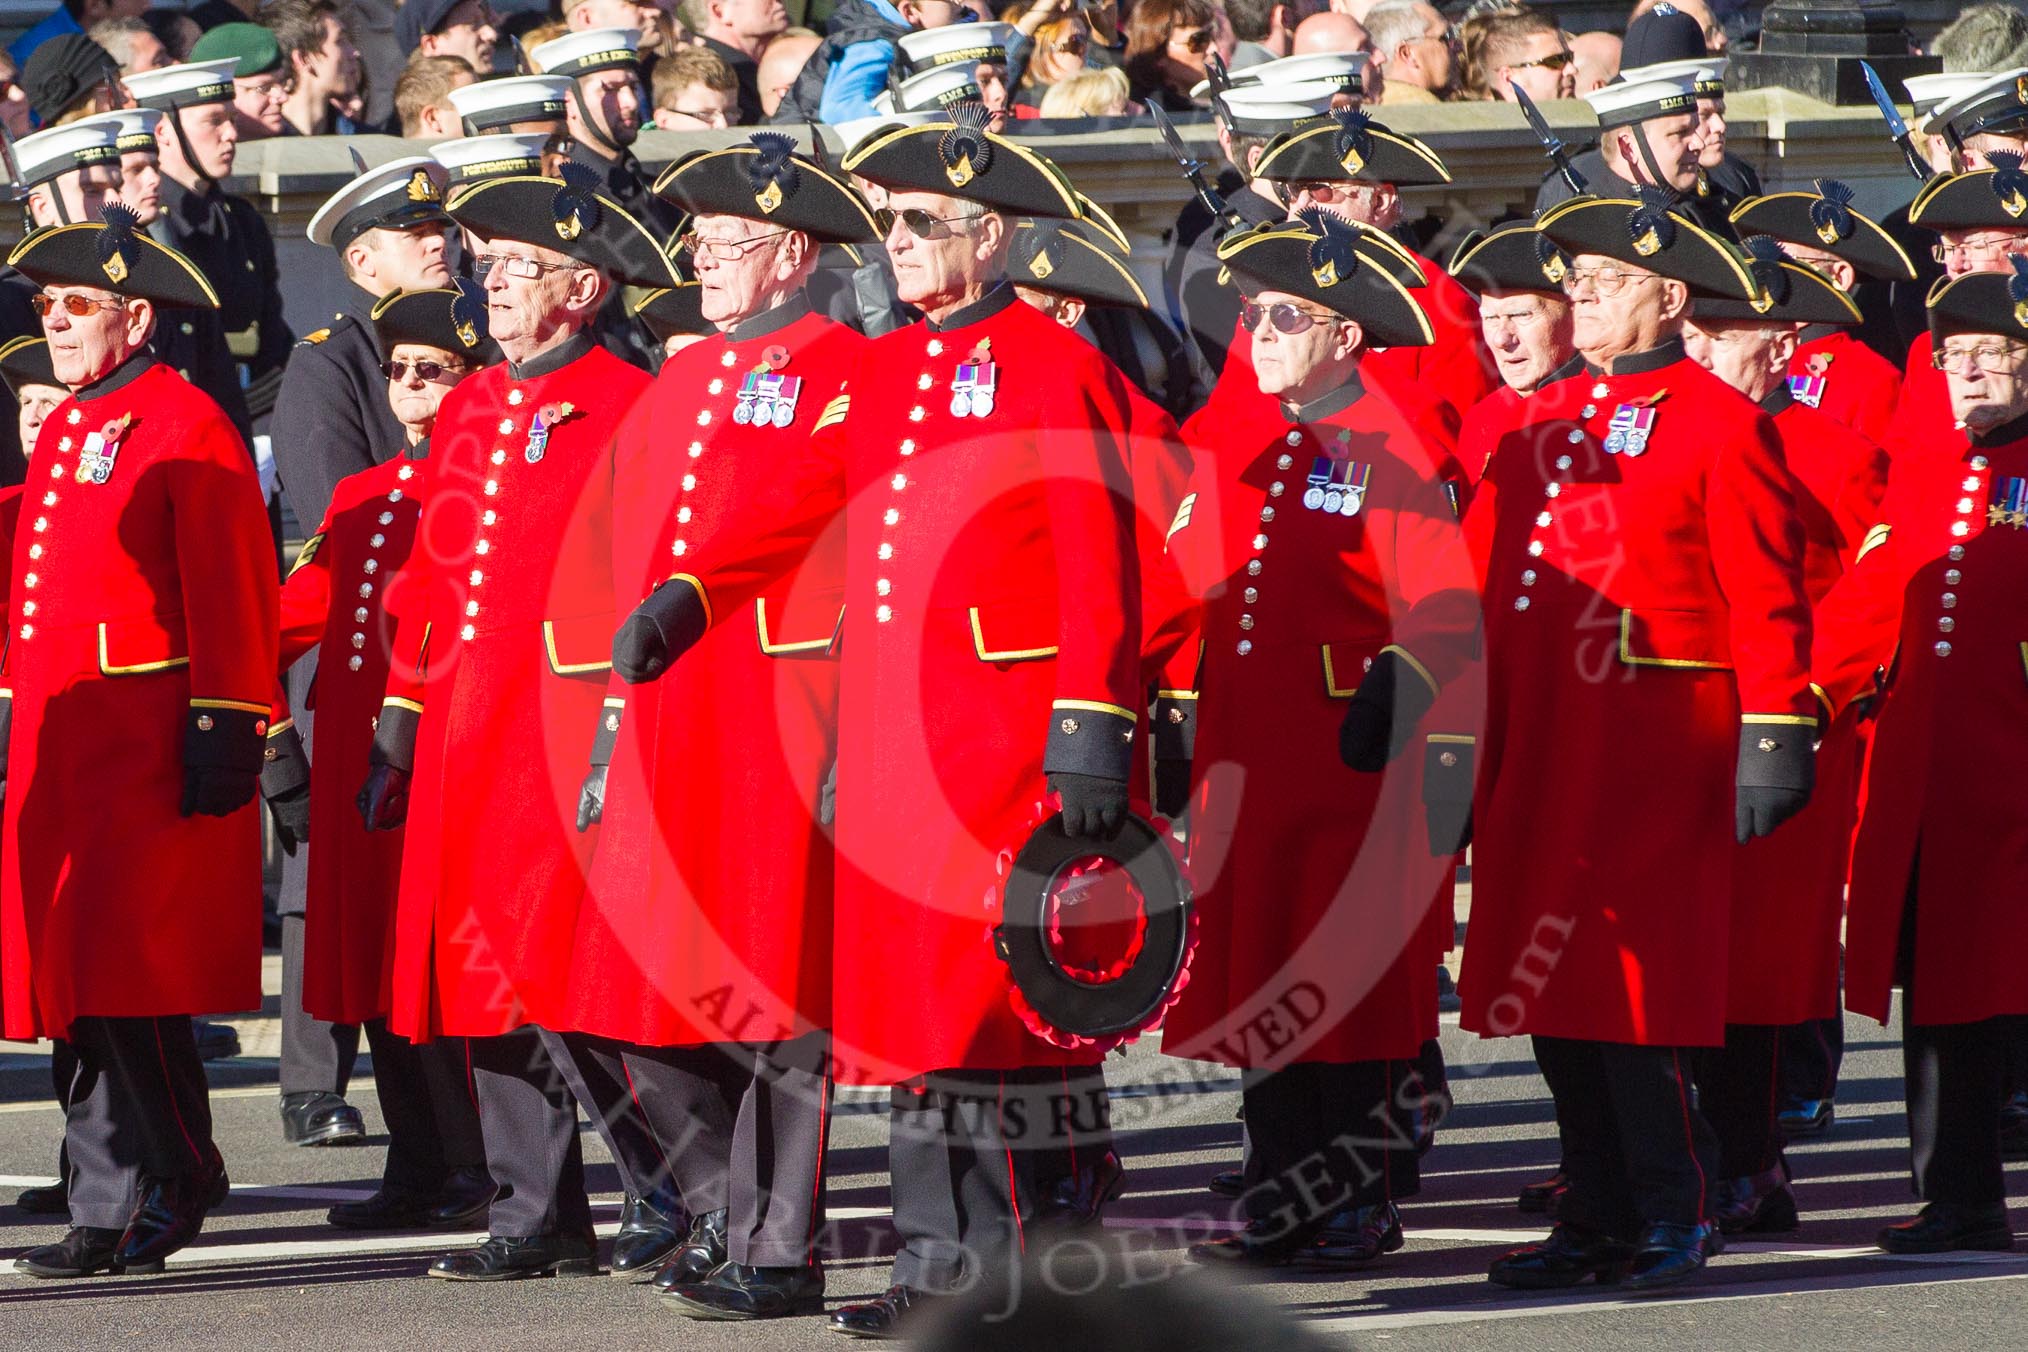 Remembrance Sunday 2012 Cenotaph March Past: Group E43 - Royal Hospital, Chelsea (Chelsea Pensioners)..
Whitehall, Cenotaph,
London SW1,

United Kingdom,
on 11 November 2012 at 11:43, image #333